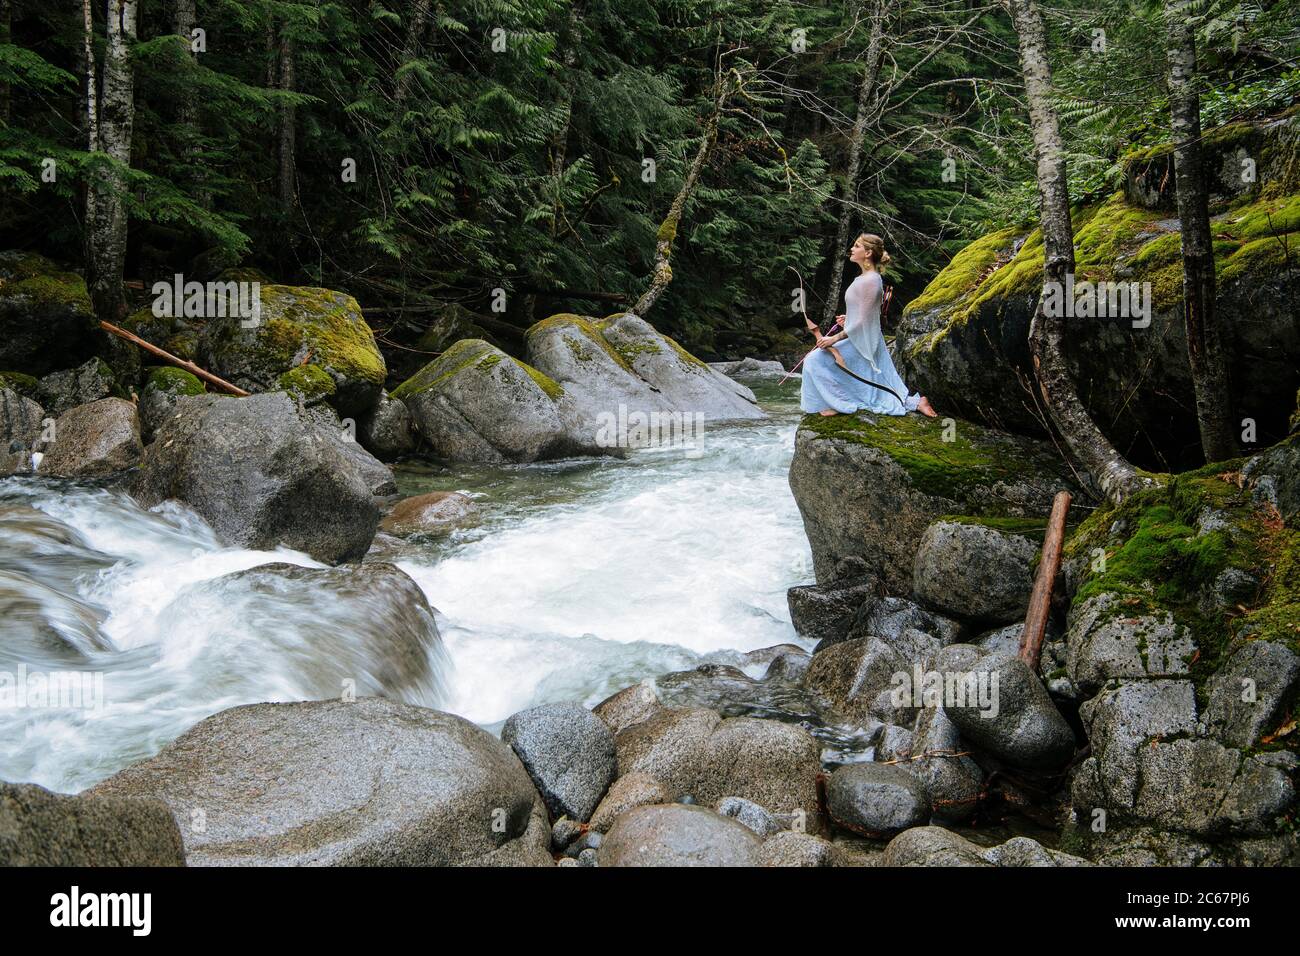 Woman with bow amidst scenic forest, Deception Falls National Recreation Area, Washington, USA Stock Photo